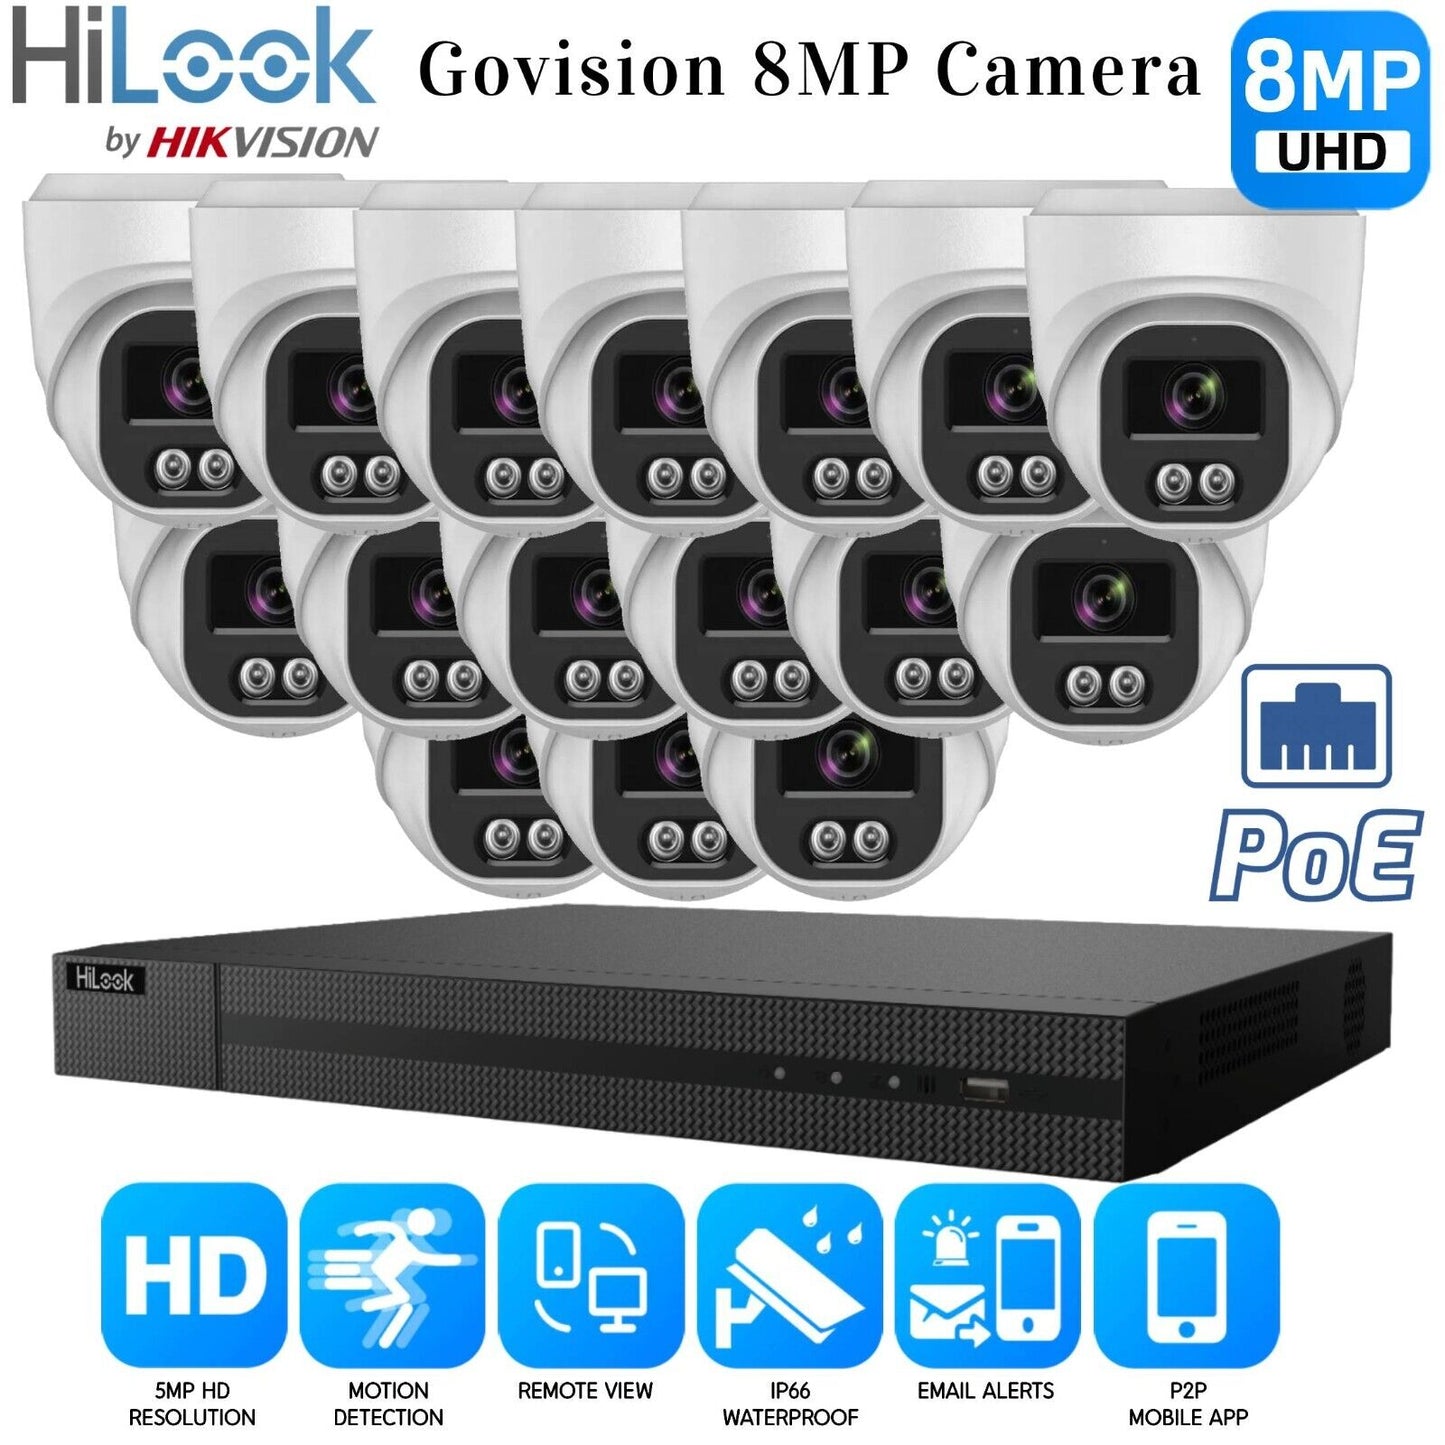 HIKVISION CCTV SYSTEM IP POE 8MP AUDIO MIC CAMERA SMART NIGHTVISION SECURITY KIT 16CH NVR 16x Cameras 4TB HDD